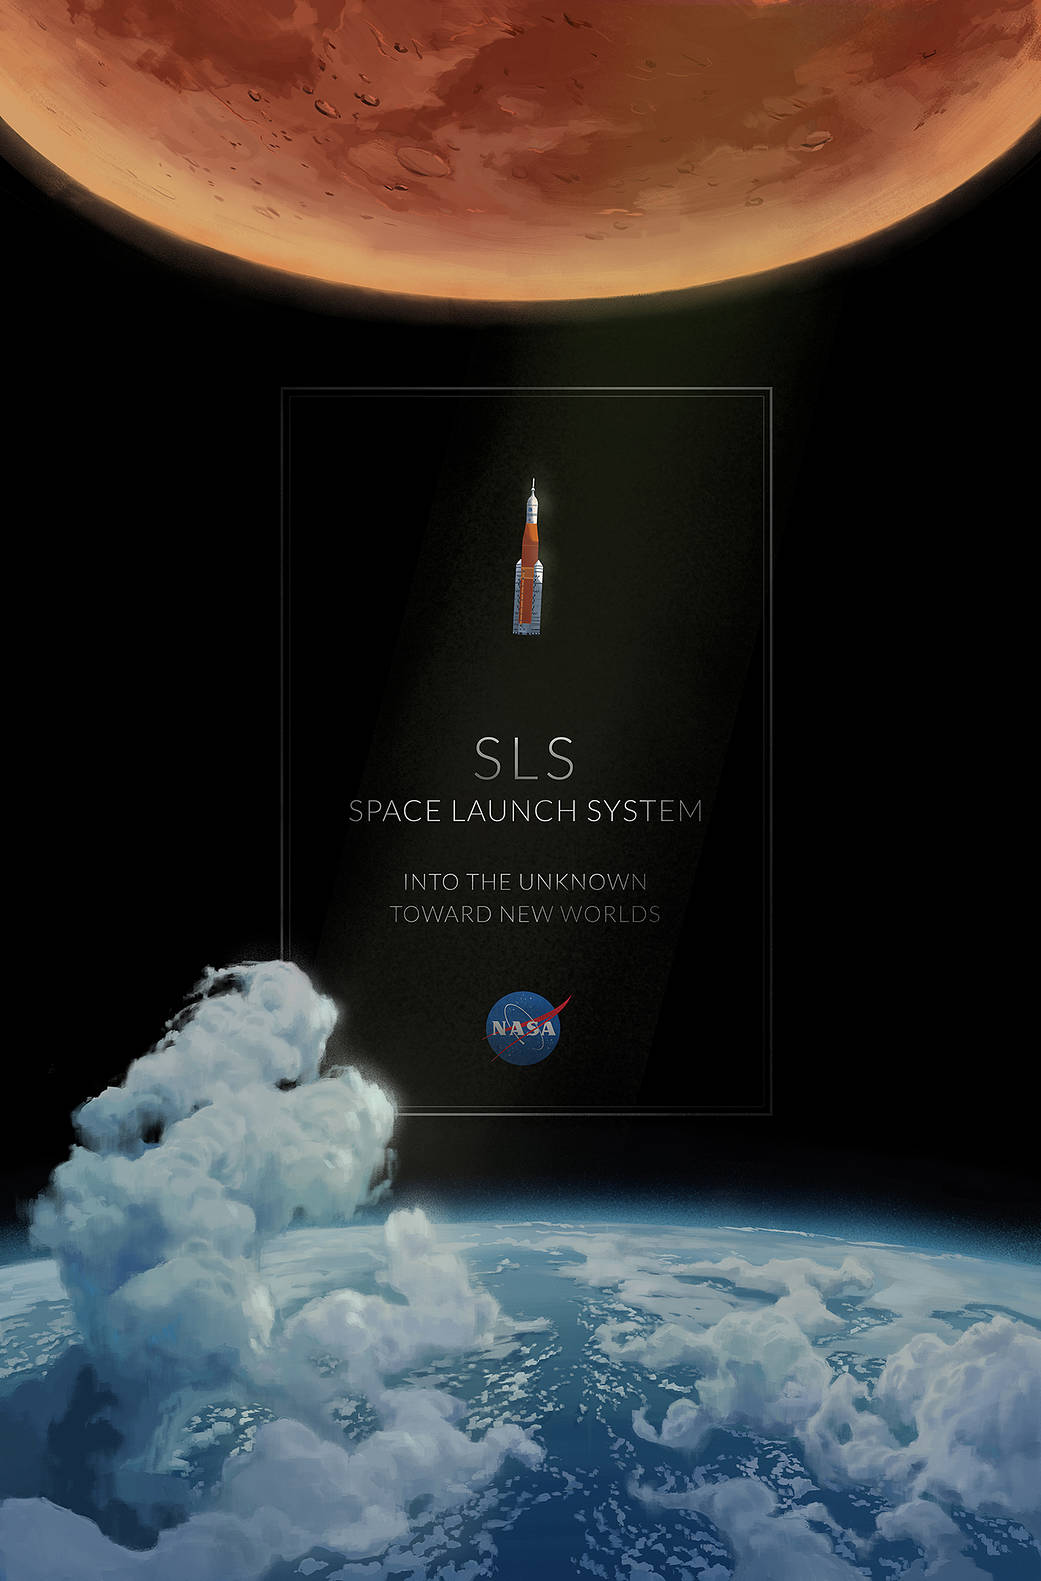 SPACE LAUNCH SYSTEM - TOWARDS NEW WORLDS